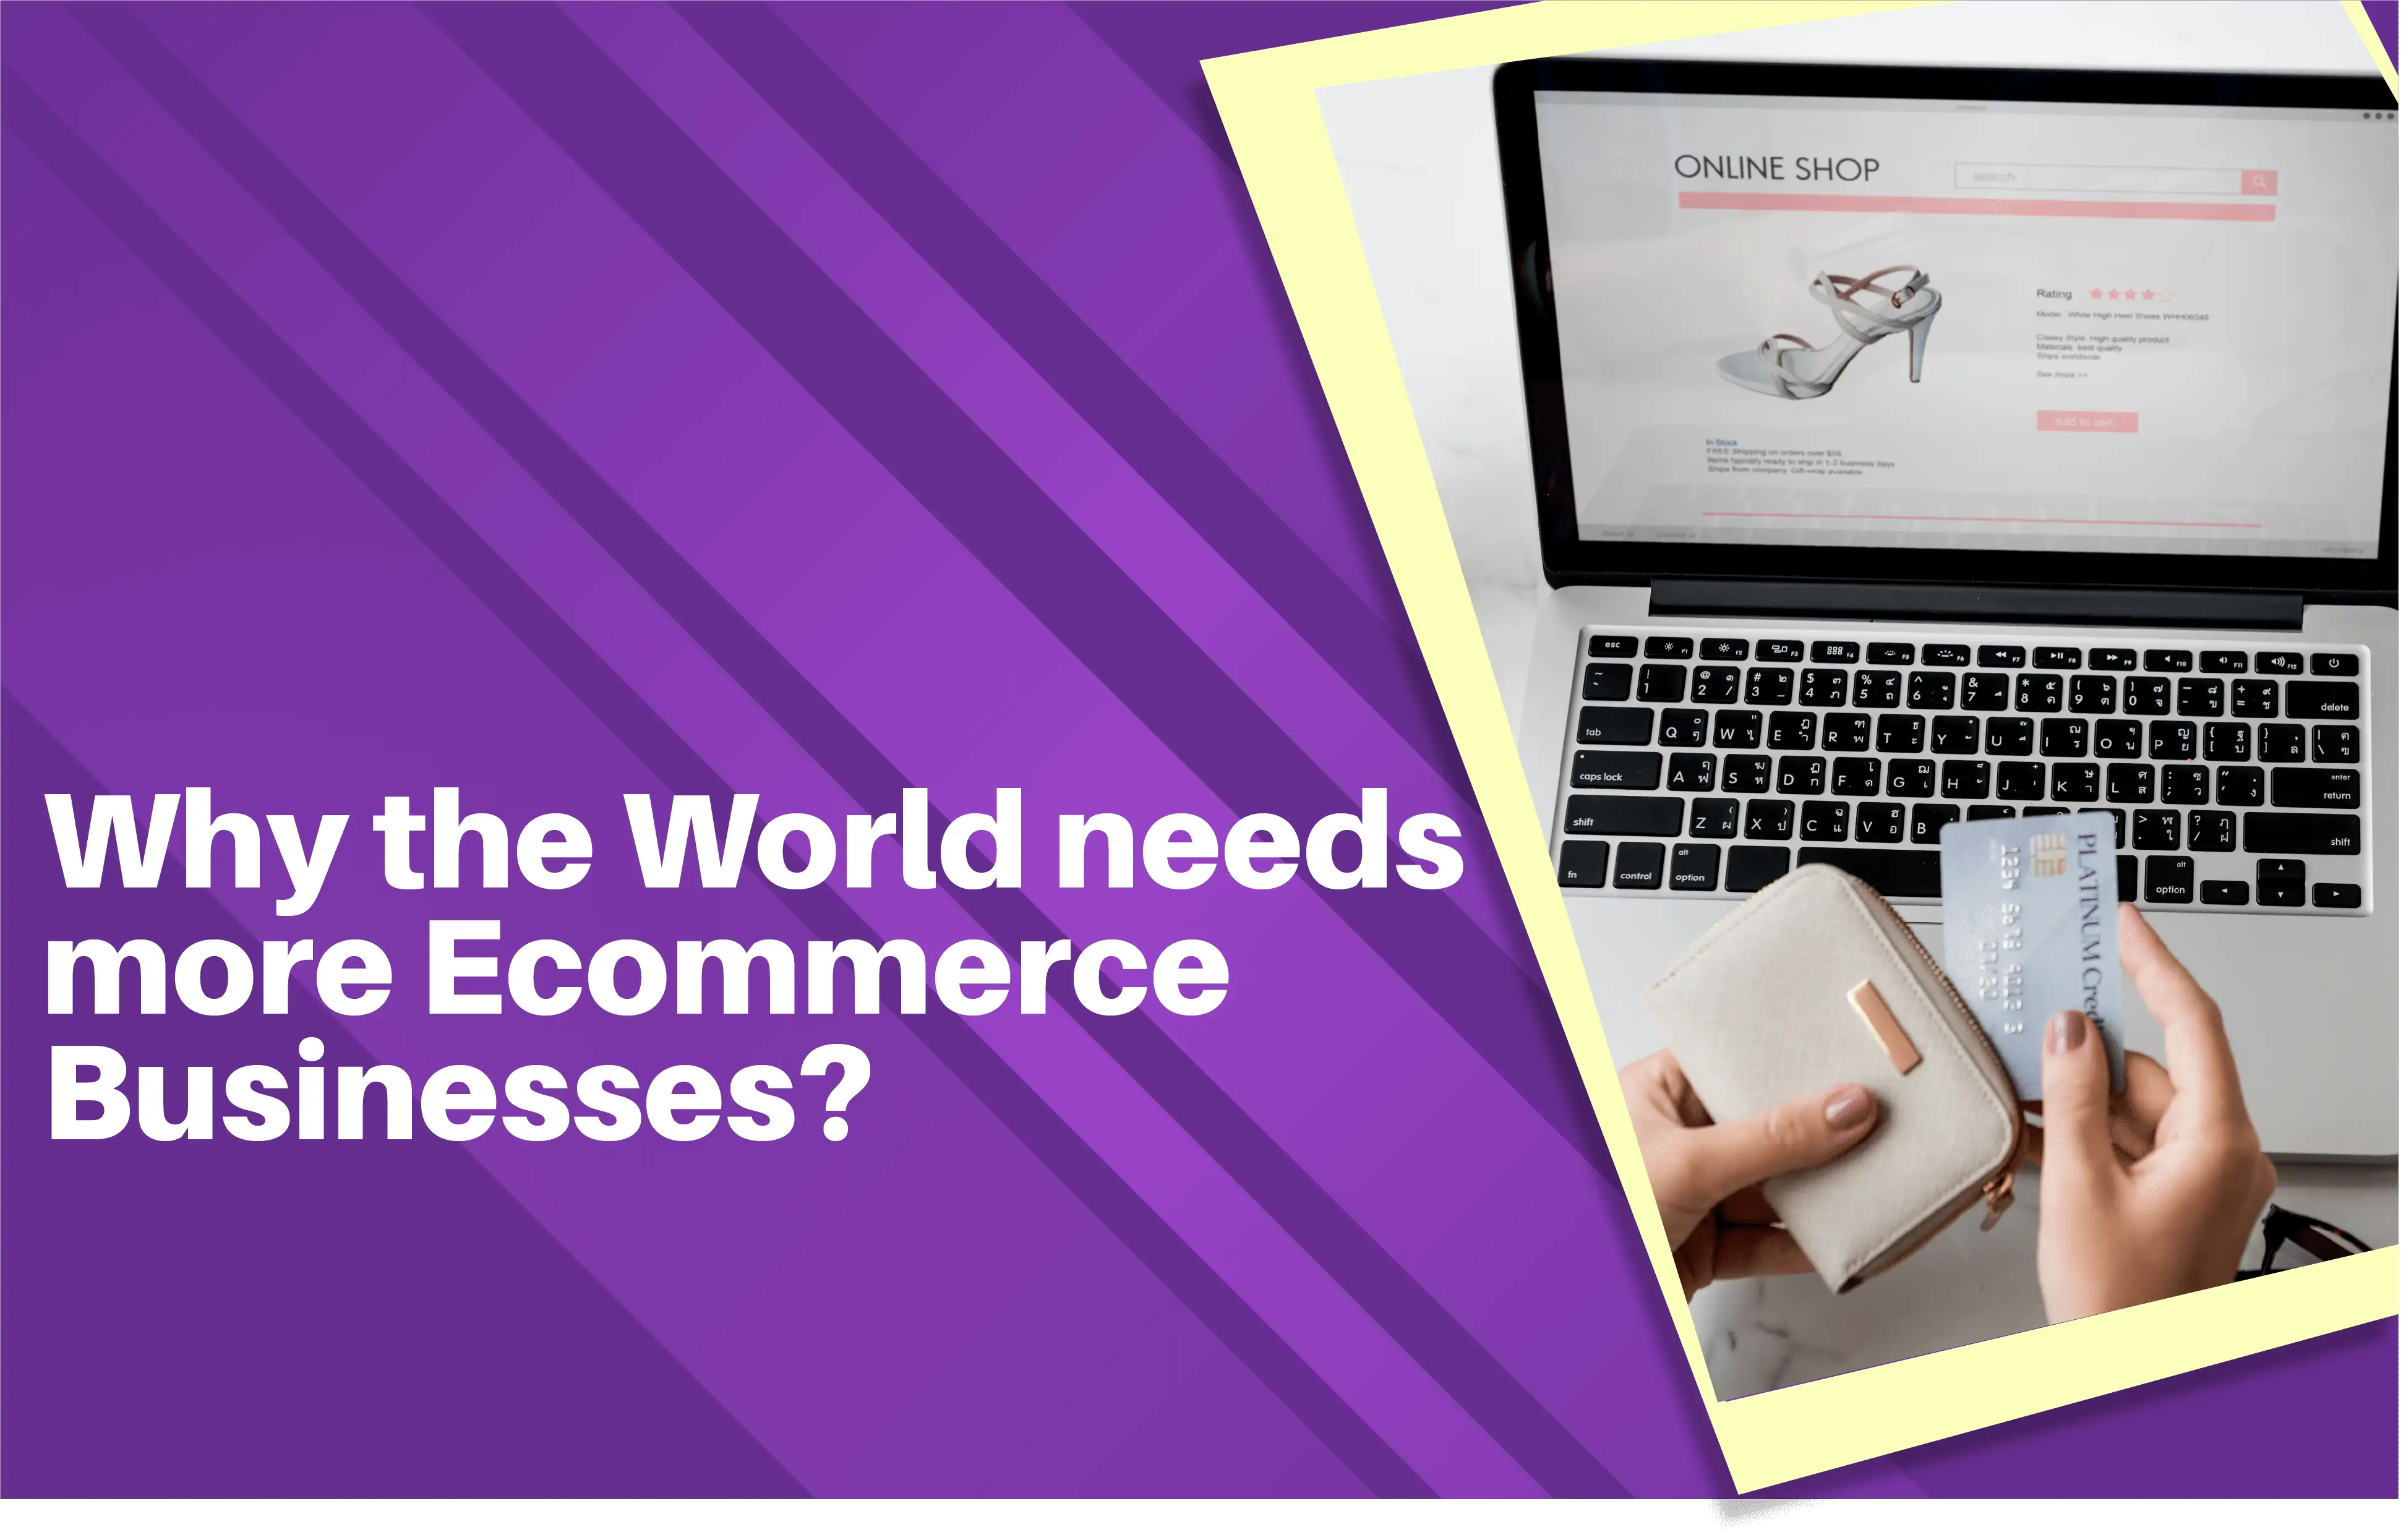 ecommerce, e commerce, e-commerce, b2b e-commerce, business to consumer b2c, electronic commerce